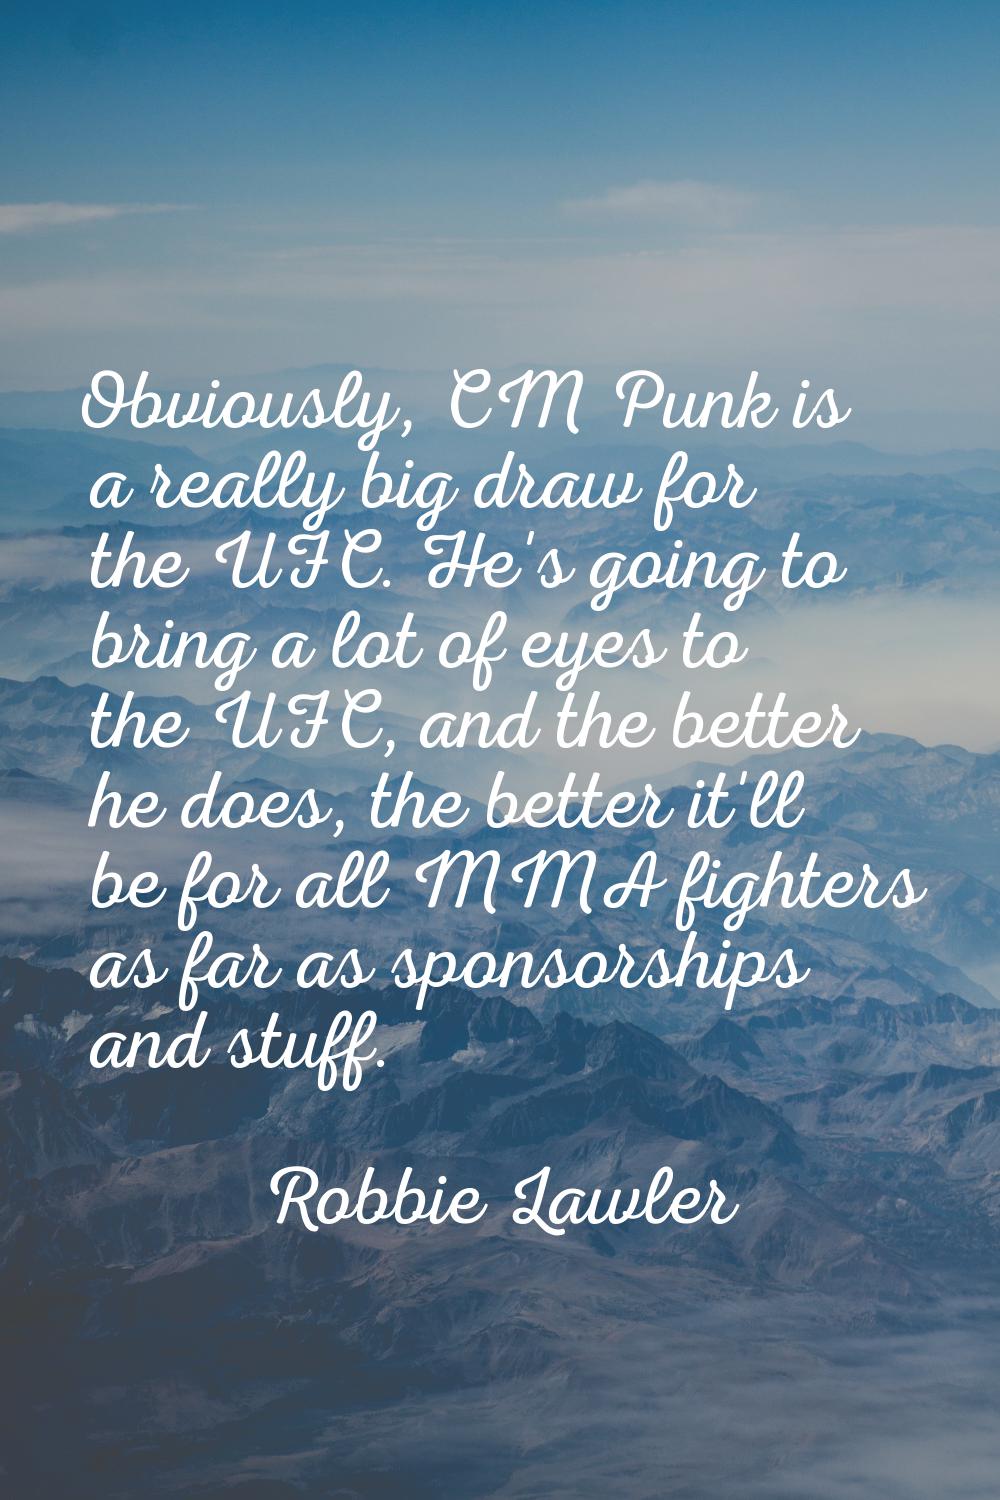 Obviously, CM Punk is a really big draw for the UFC. He's going to bring a lot of eyes to the UFC, 